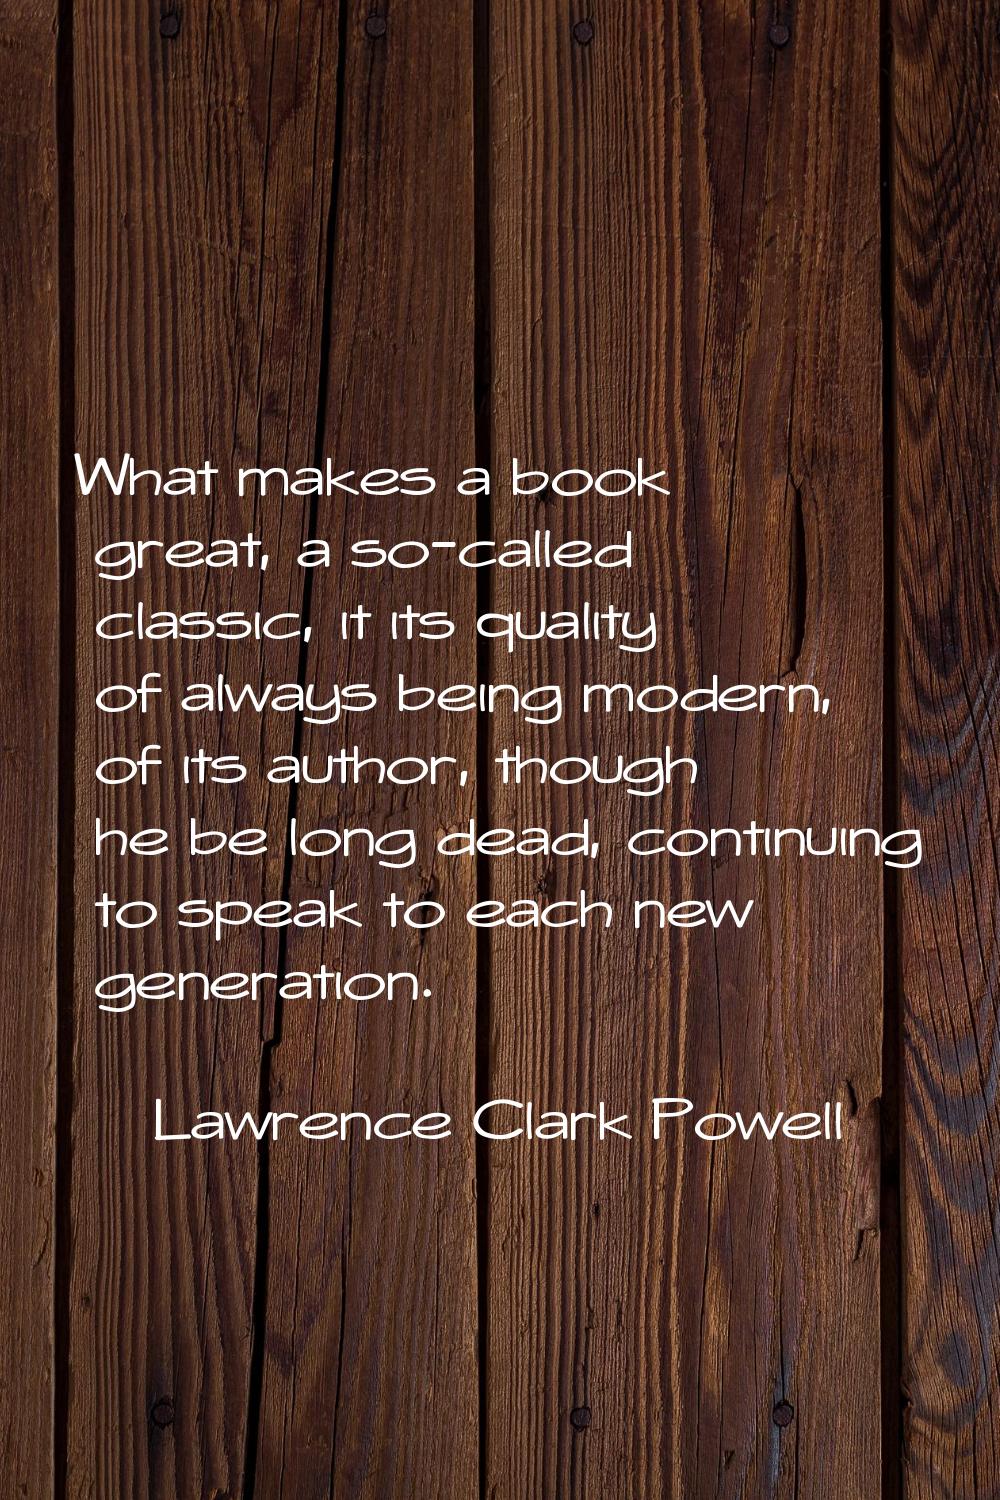 What makes a book great, a so-called classic, it its quality of always being modern, of its author,